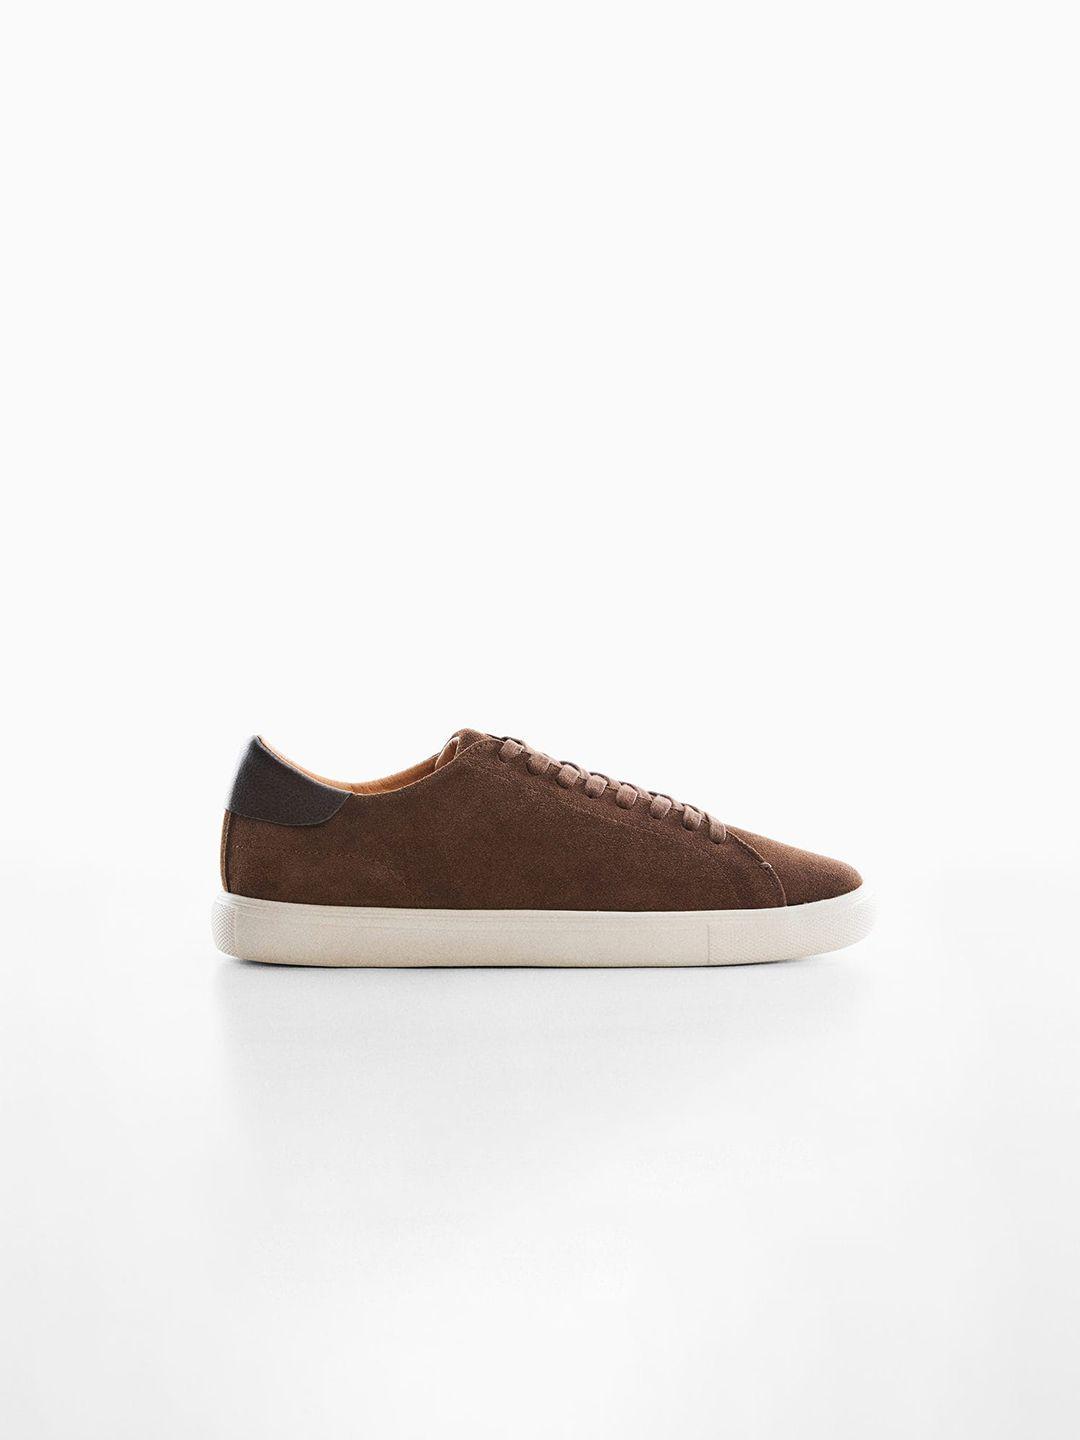 mango-man-suede-leather-sustainable-sneakers